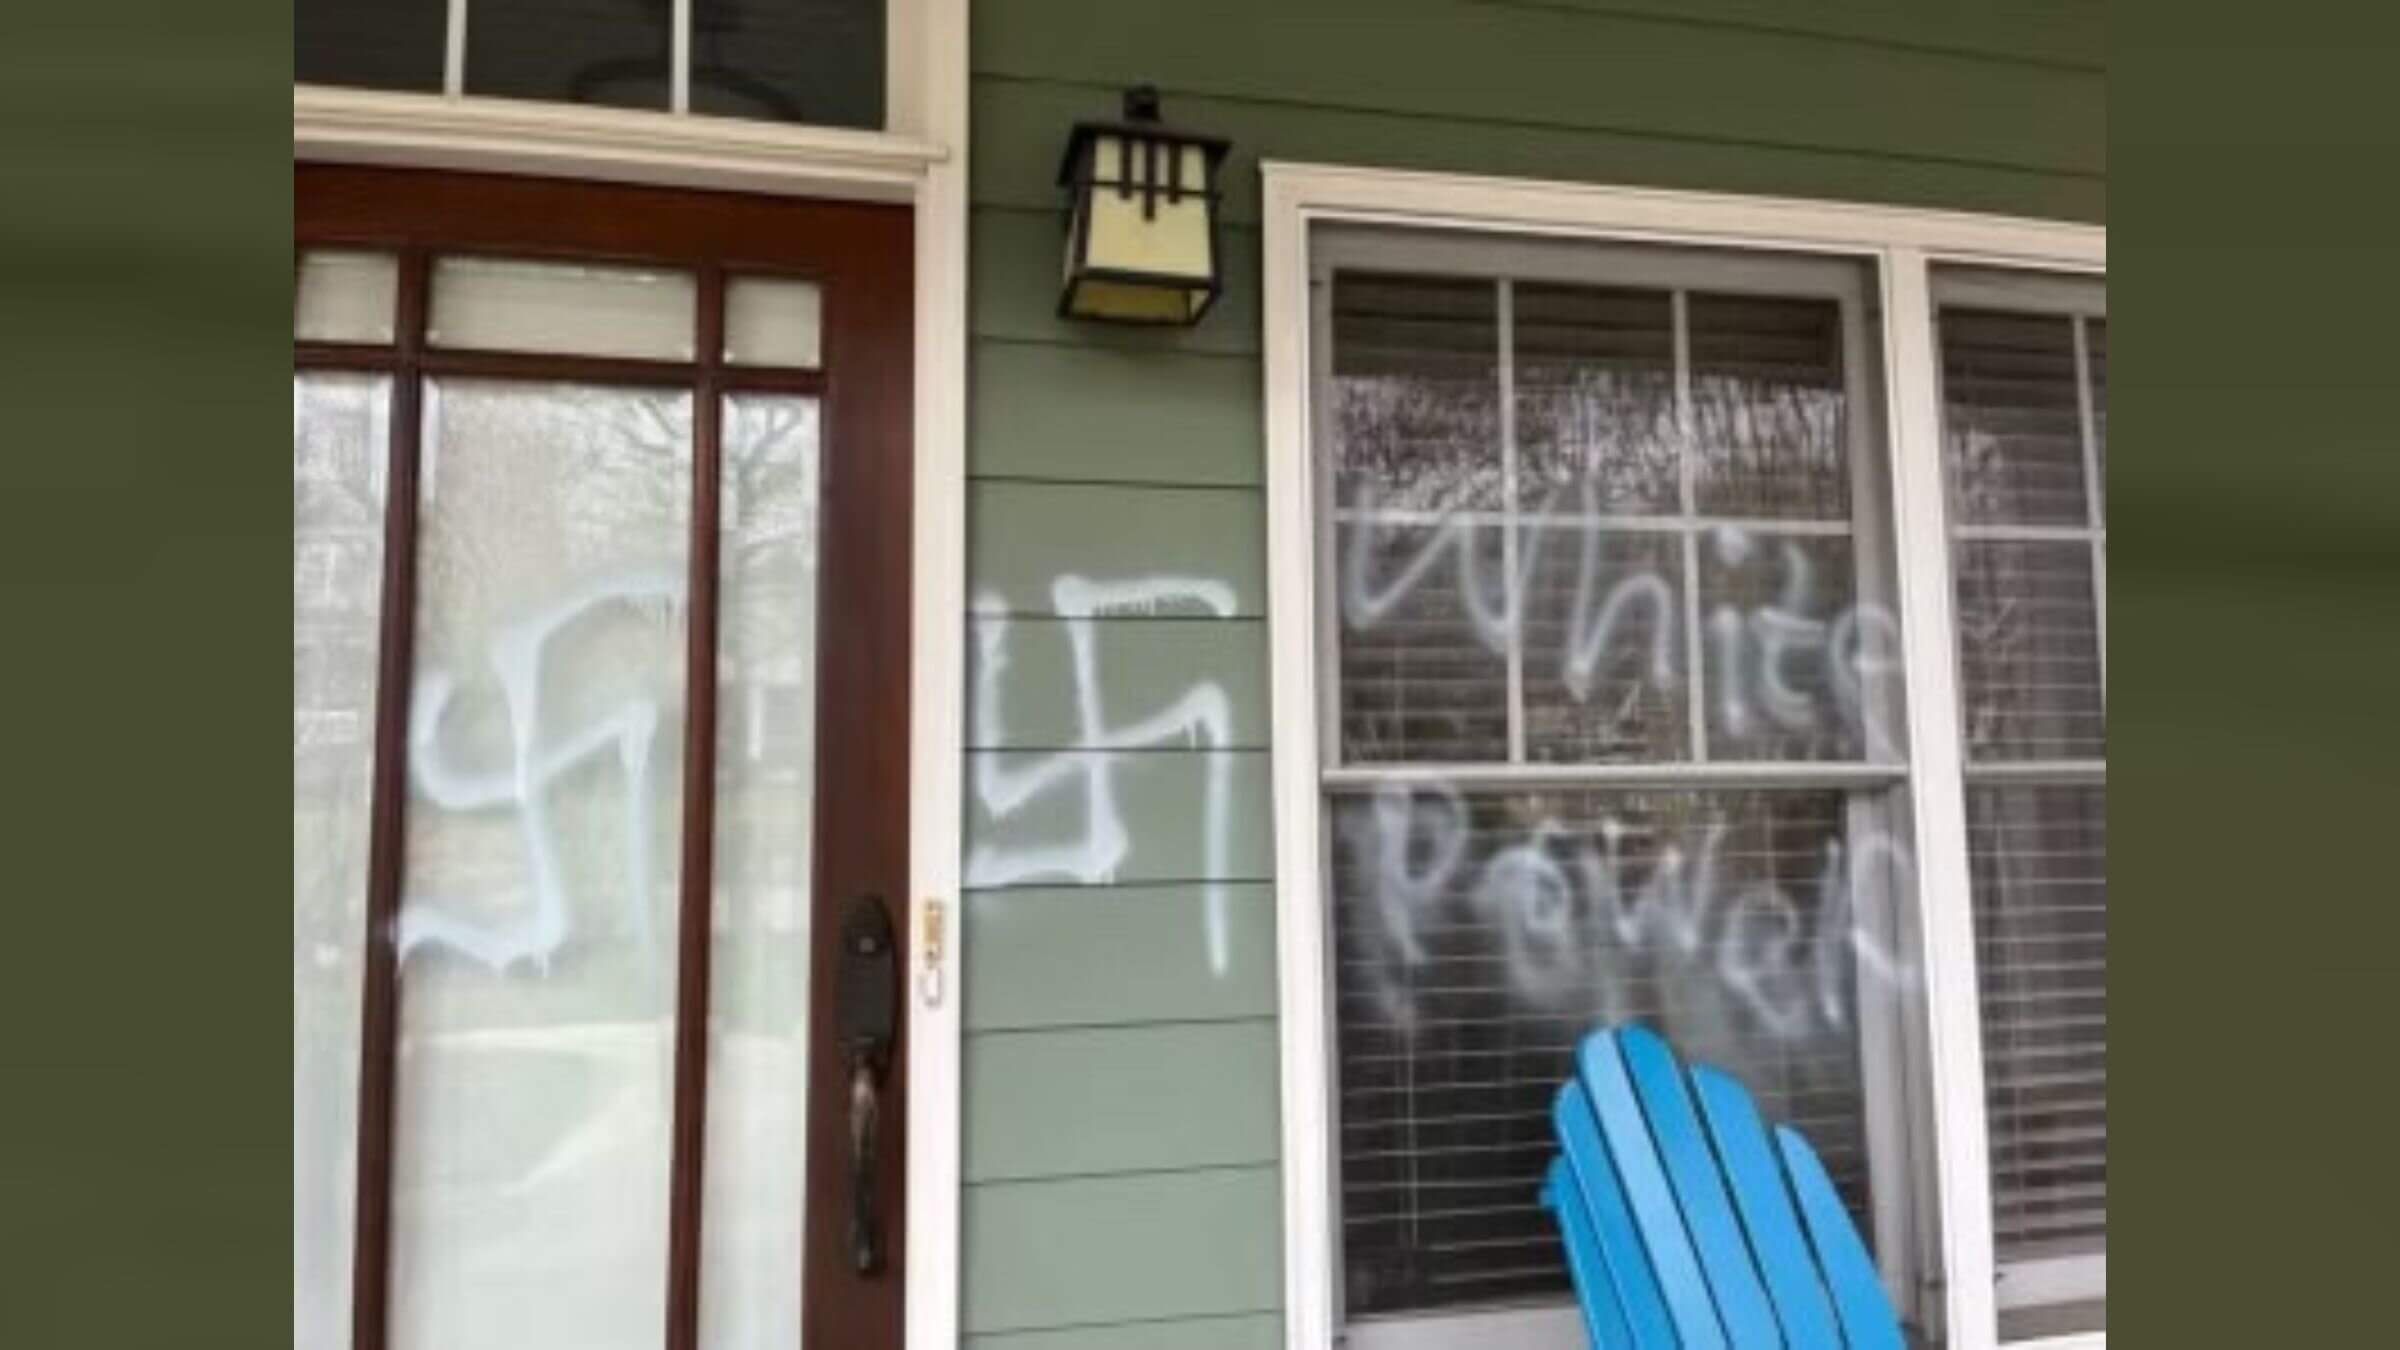 A Tennessee State University professor’s home was vandalized with white supremacist slogans and swastikas.